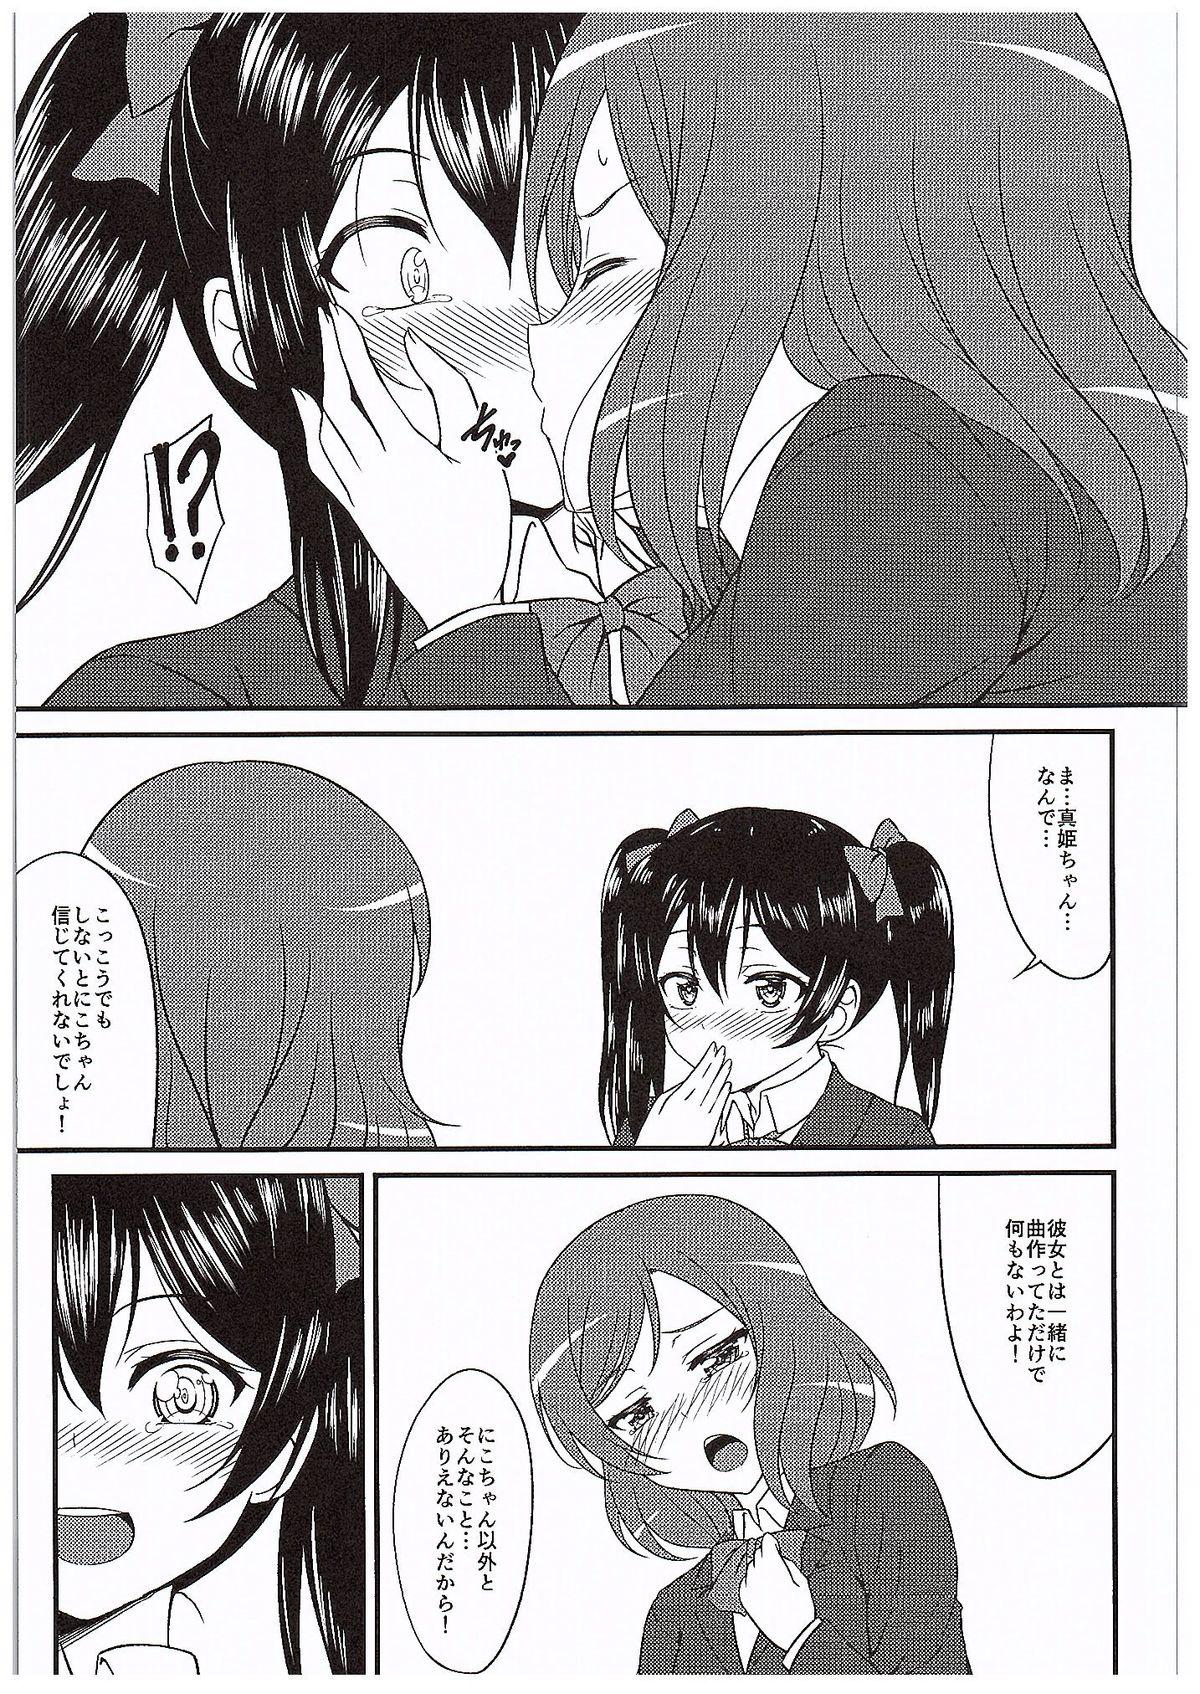 Small Magnetic Love - Love live Parties - Page 6